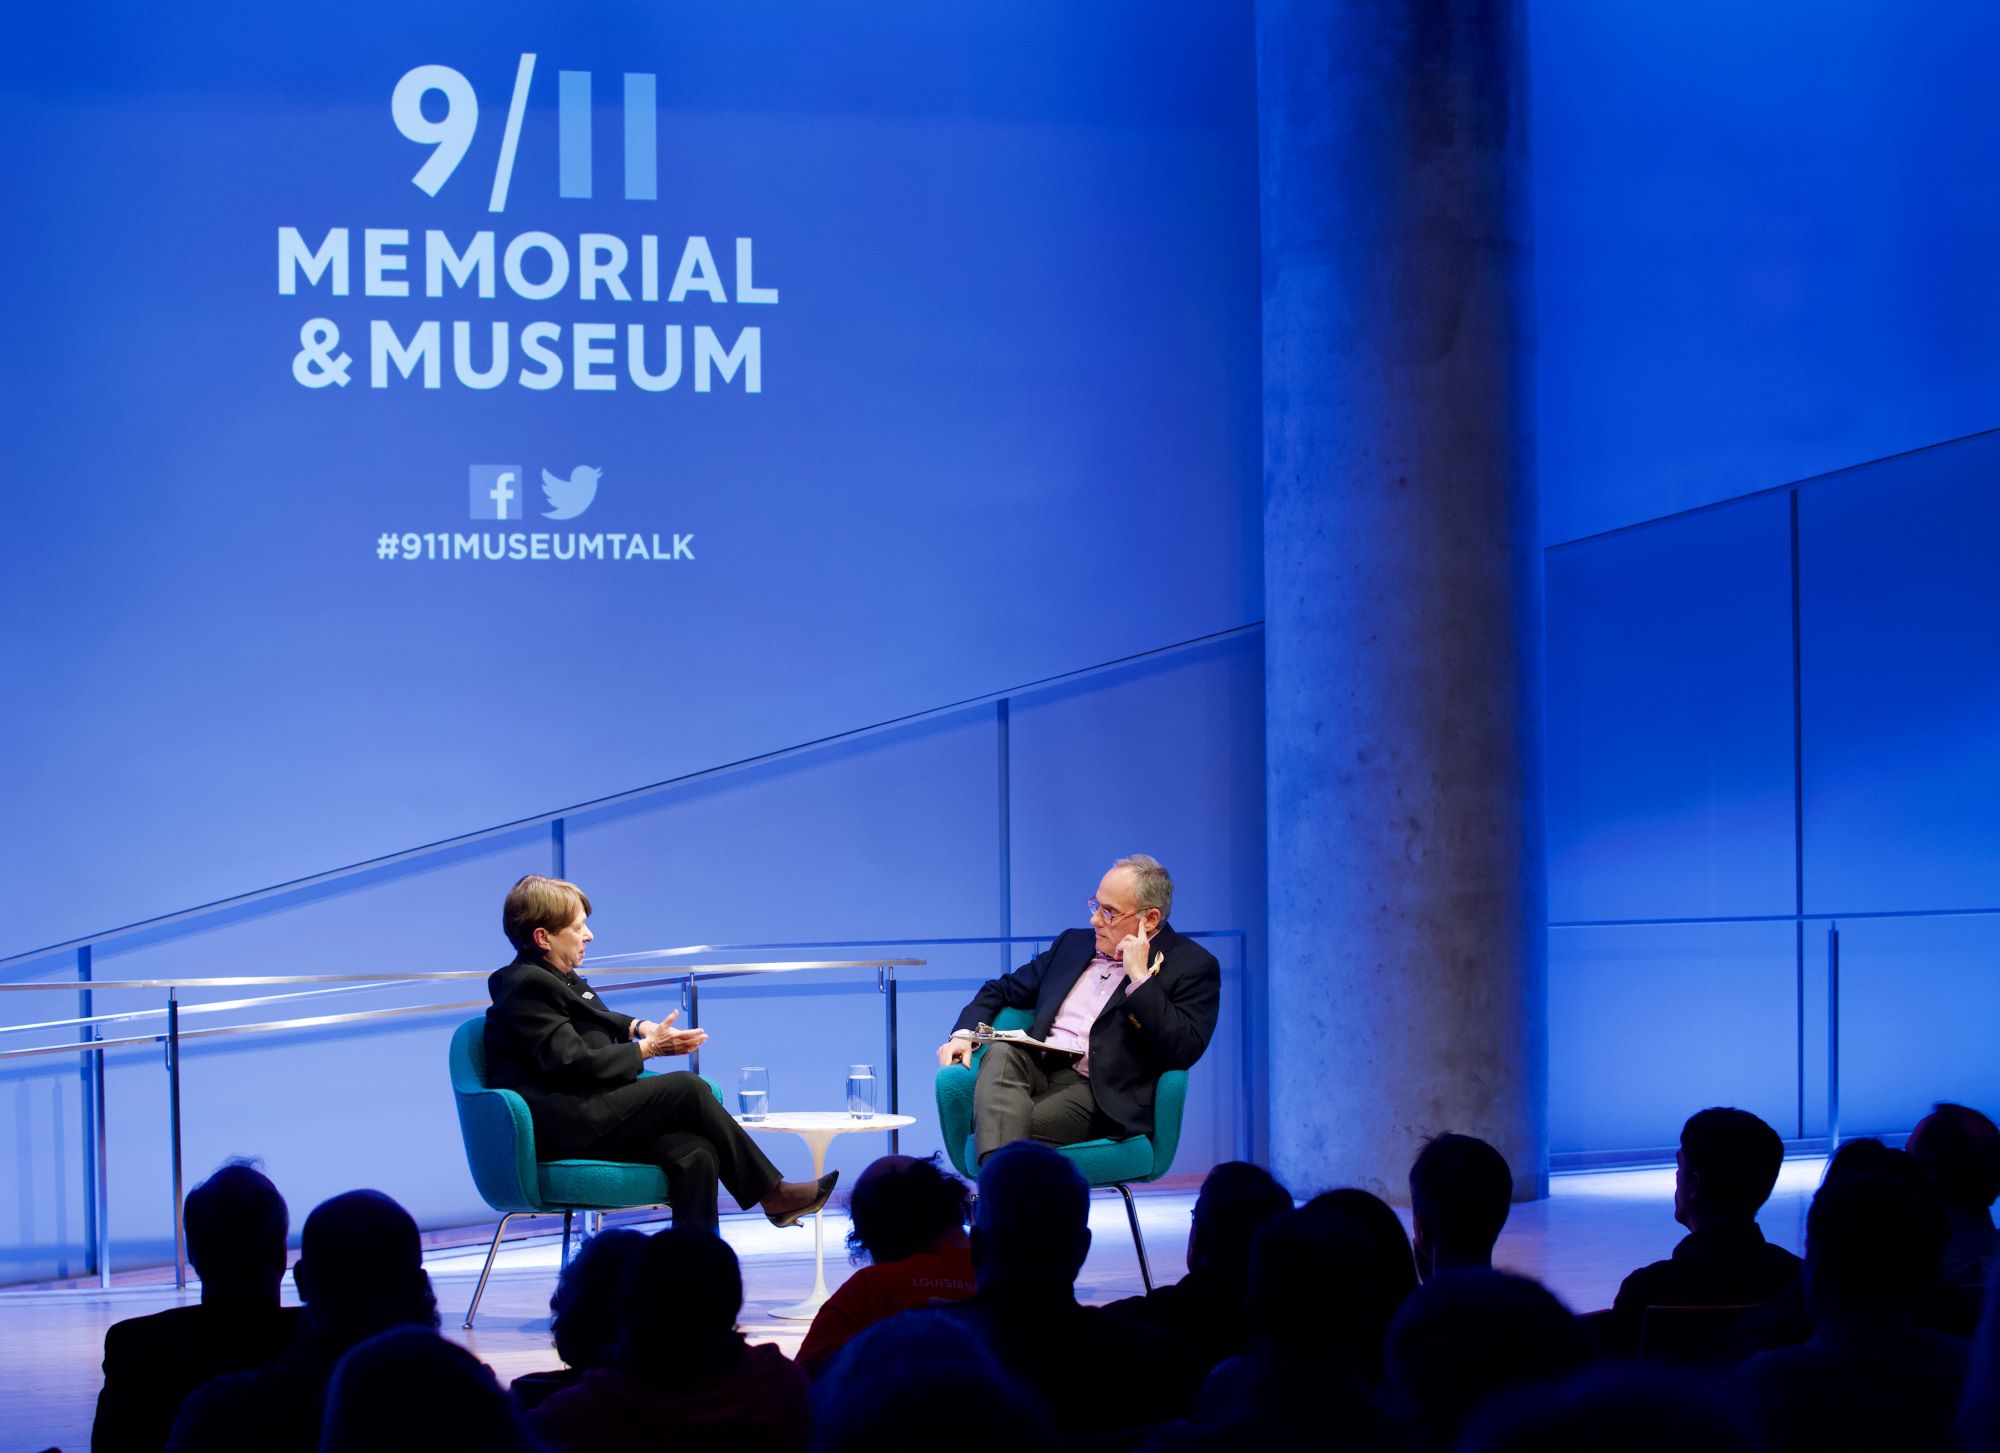 This wide-angle photo shows former U.S. Attorney Mary Jo White of the Southern District of New York speaking onstage as she takes part in the public program, Prosecuting the 1993 Bombers. Clifford Chanin, the executive vice president and deputy director for museum programs, sits next to her. Members of the audience are silhouetted by the lights onstage. The logo of the 9/11 Memorial & Museum is projected on the wall above White.